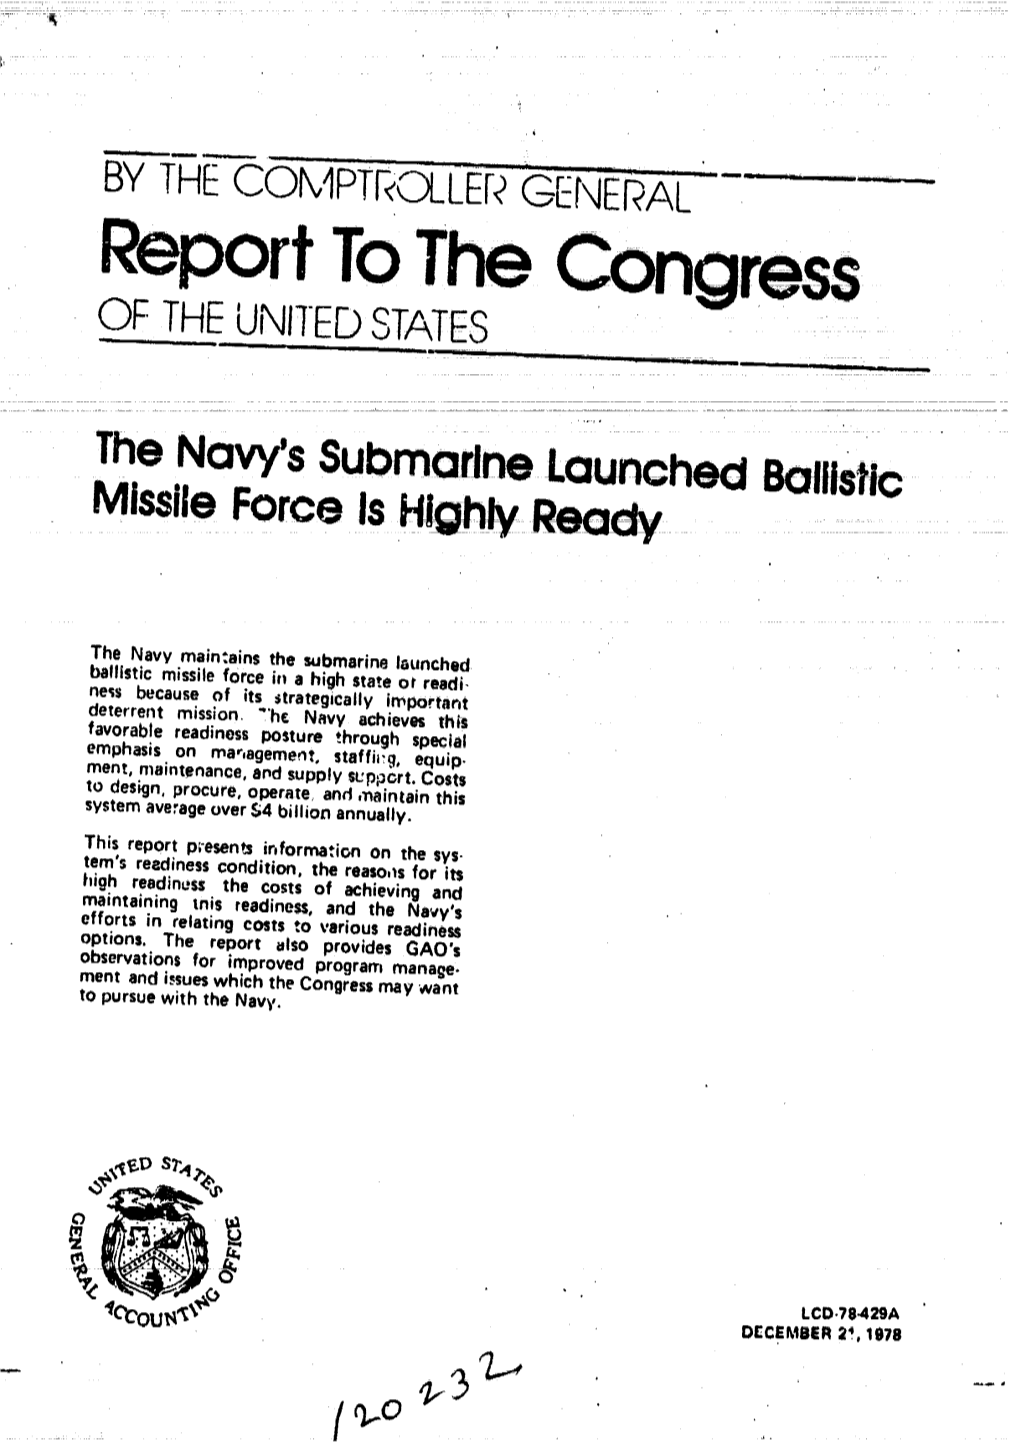 LCD-78-429 Navy's Submarine Launched Ballistic Missile Force Is